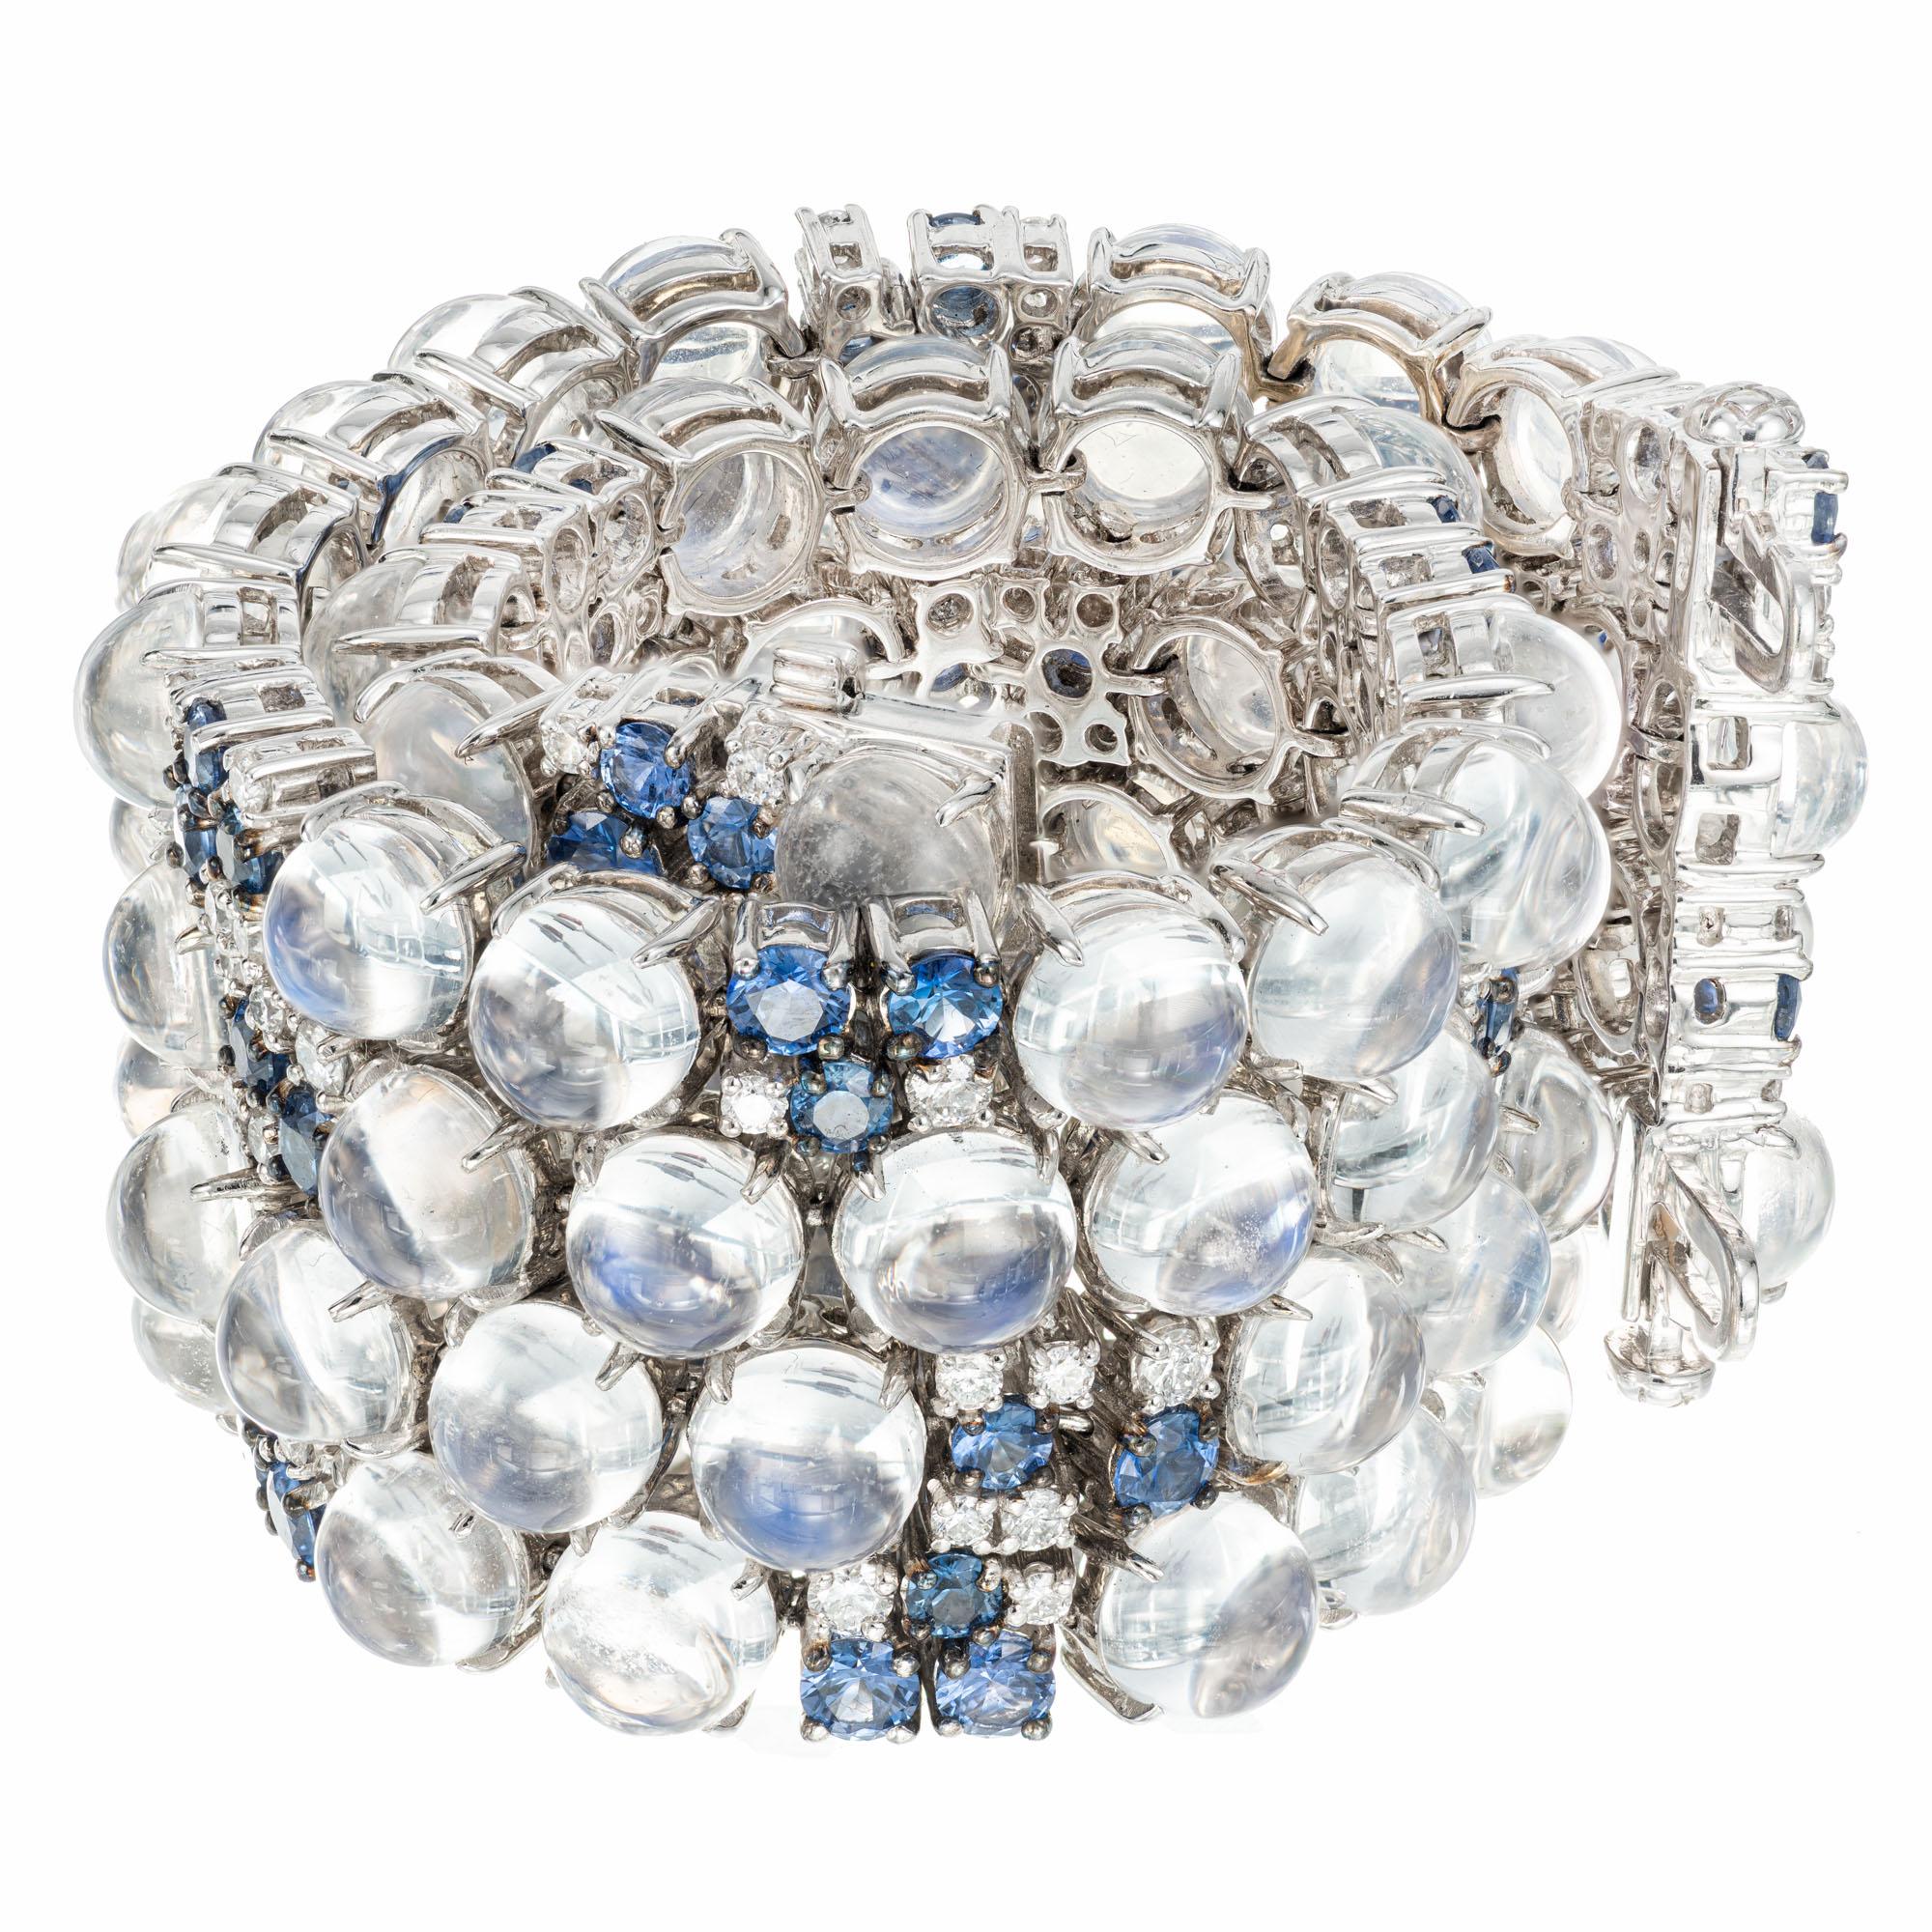 Moonstone, diamond and sapphire bracelet. 88 round cabochon moonstones accented with 66 round sapphires and 96 round brilliant cut diamonds inter mixed between the moonstones. The sapphires reflect into the moonstones causing a beautiful blueish/